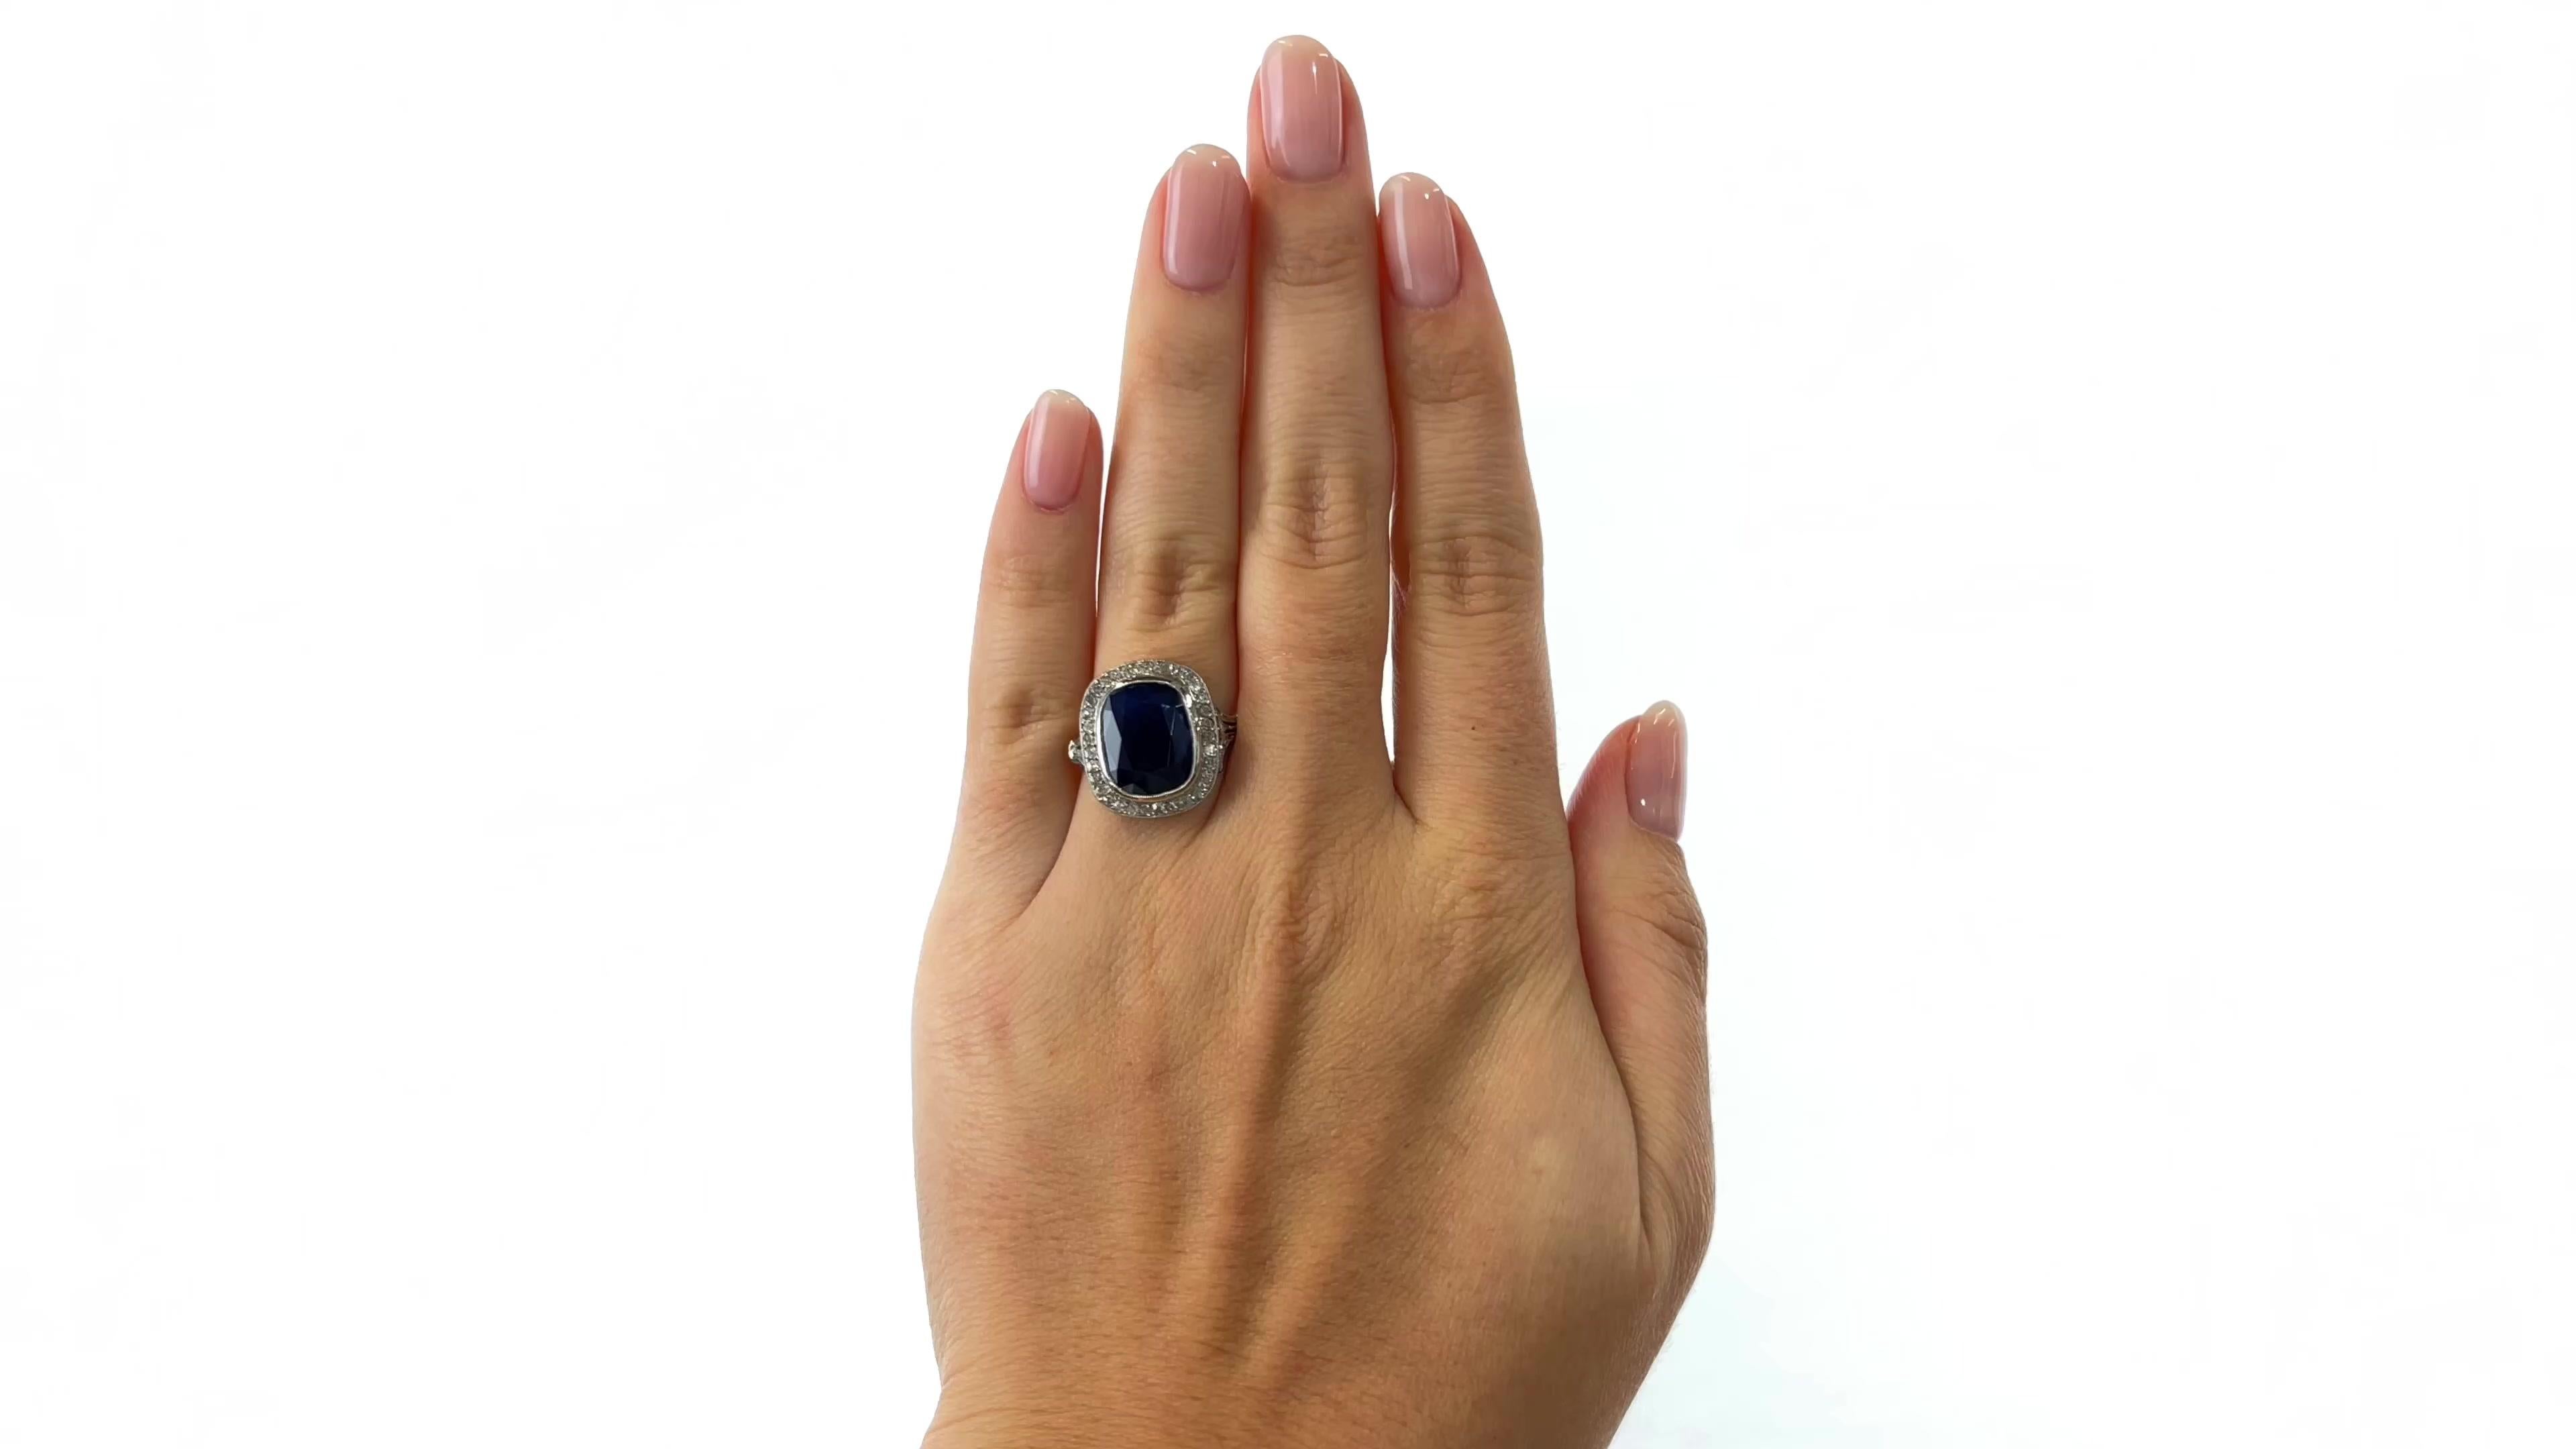 One Antique French GIA 6.97 Carat Sapphire Diamond Platinum Cocktail Ring. Featuring a 6.97 carat cushion cut sapphire accompanied with GIA certificate #5222130554 stating the sapphire is of Cambodian origin and has not been heat treated. Accented